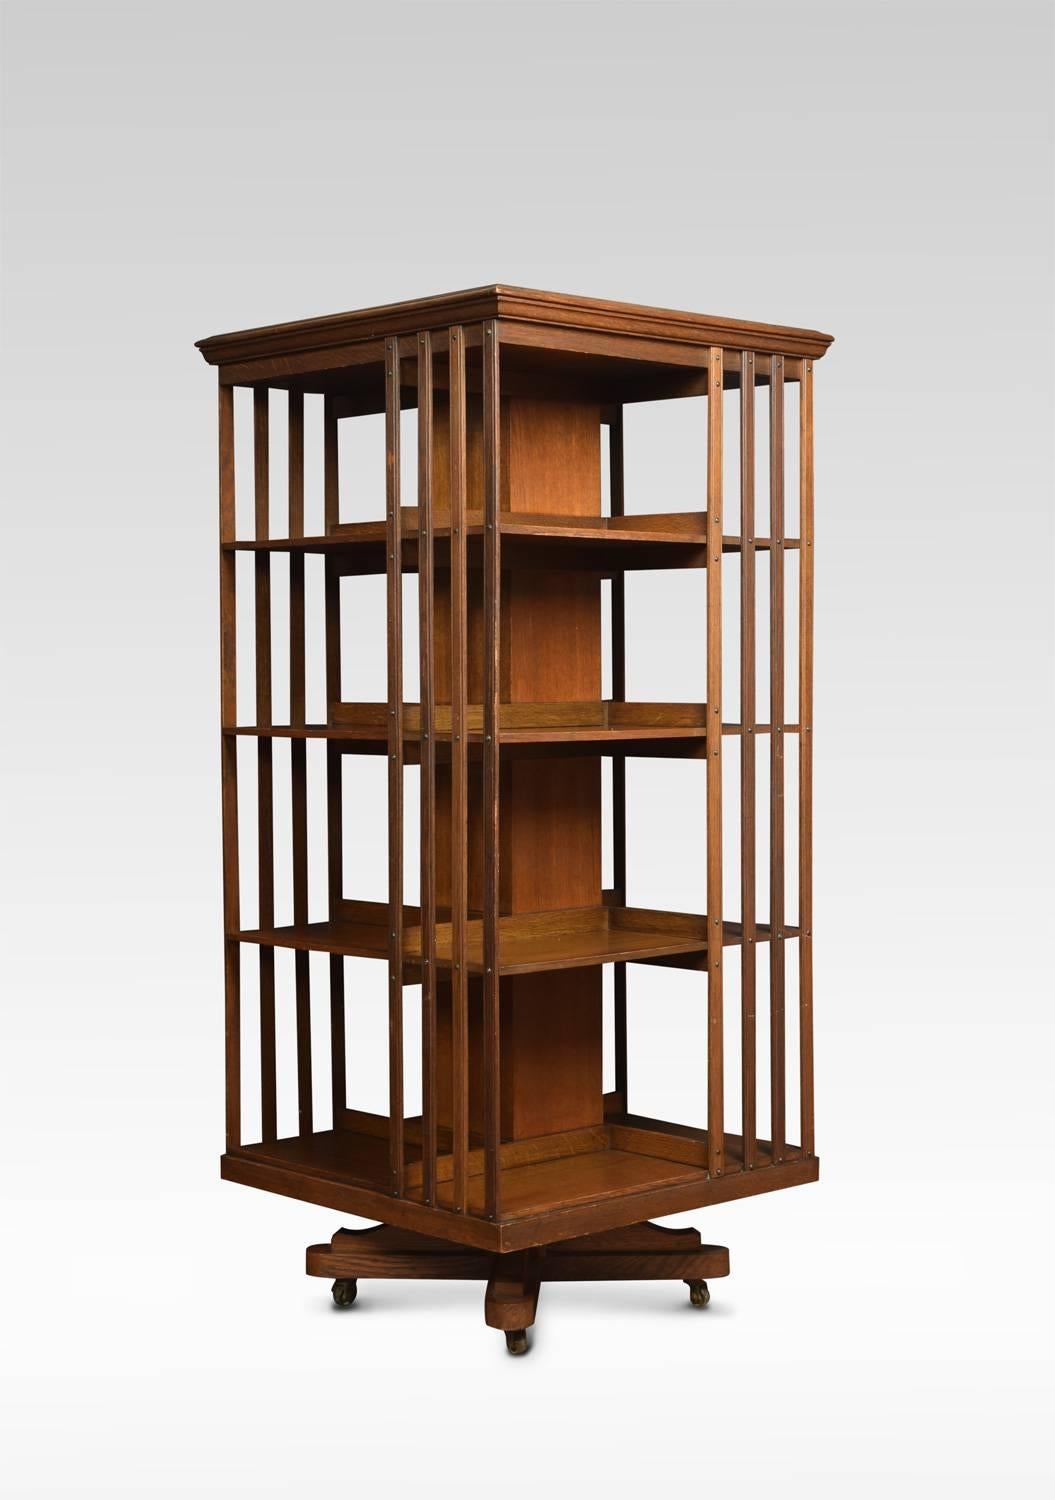 Oak revolving bookcase the square top above four tiers with an arrangement off shelves raised up on cruciform base with castors
Dimensions
Height 52 inches
Width 24 inches
Depth 24 inches.